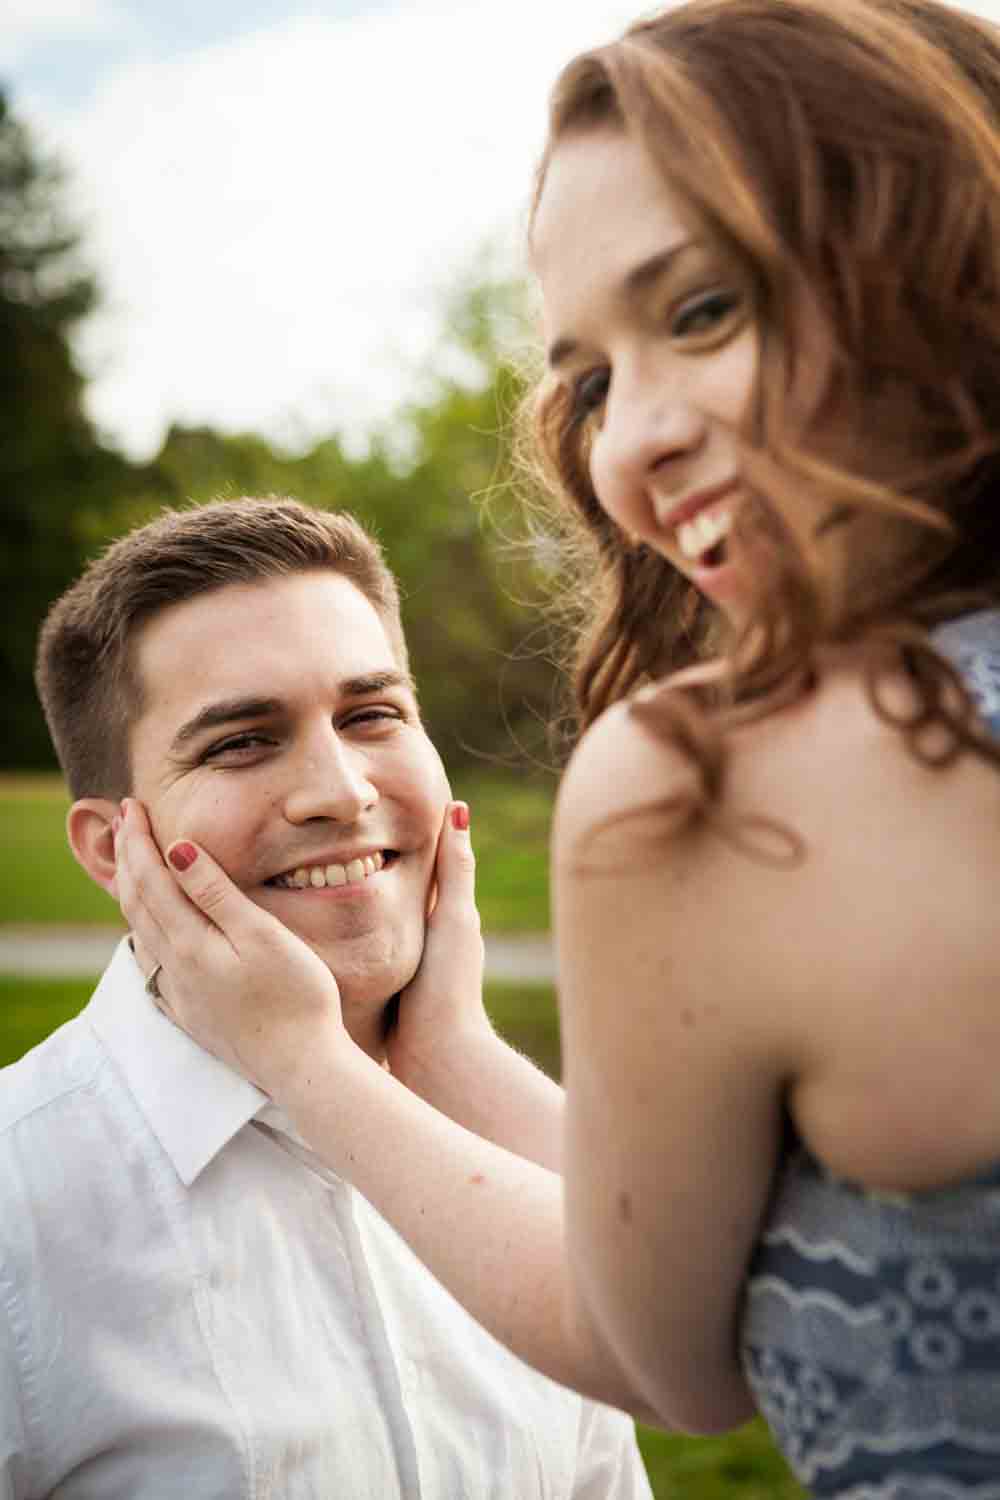 Woman holding man's face at a Lyndhurst Mansion engagement photoshoot